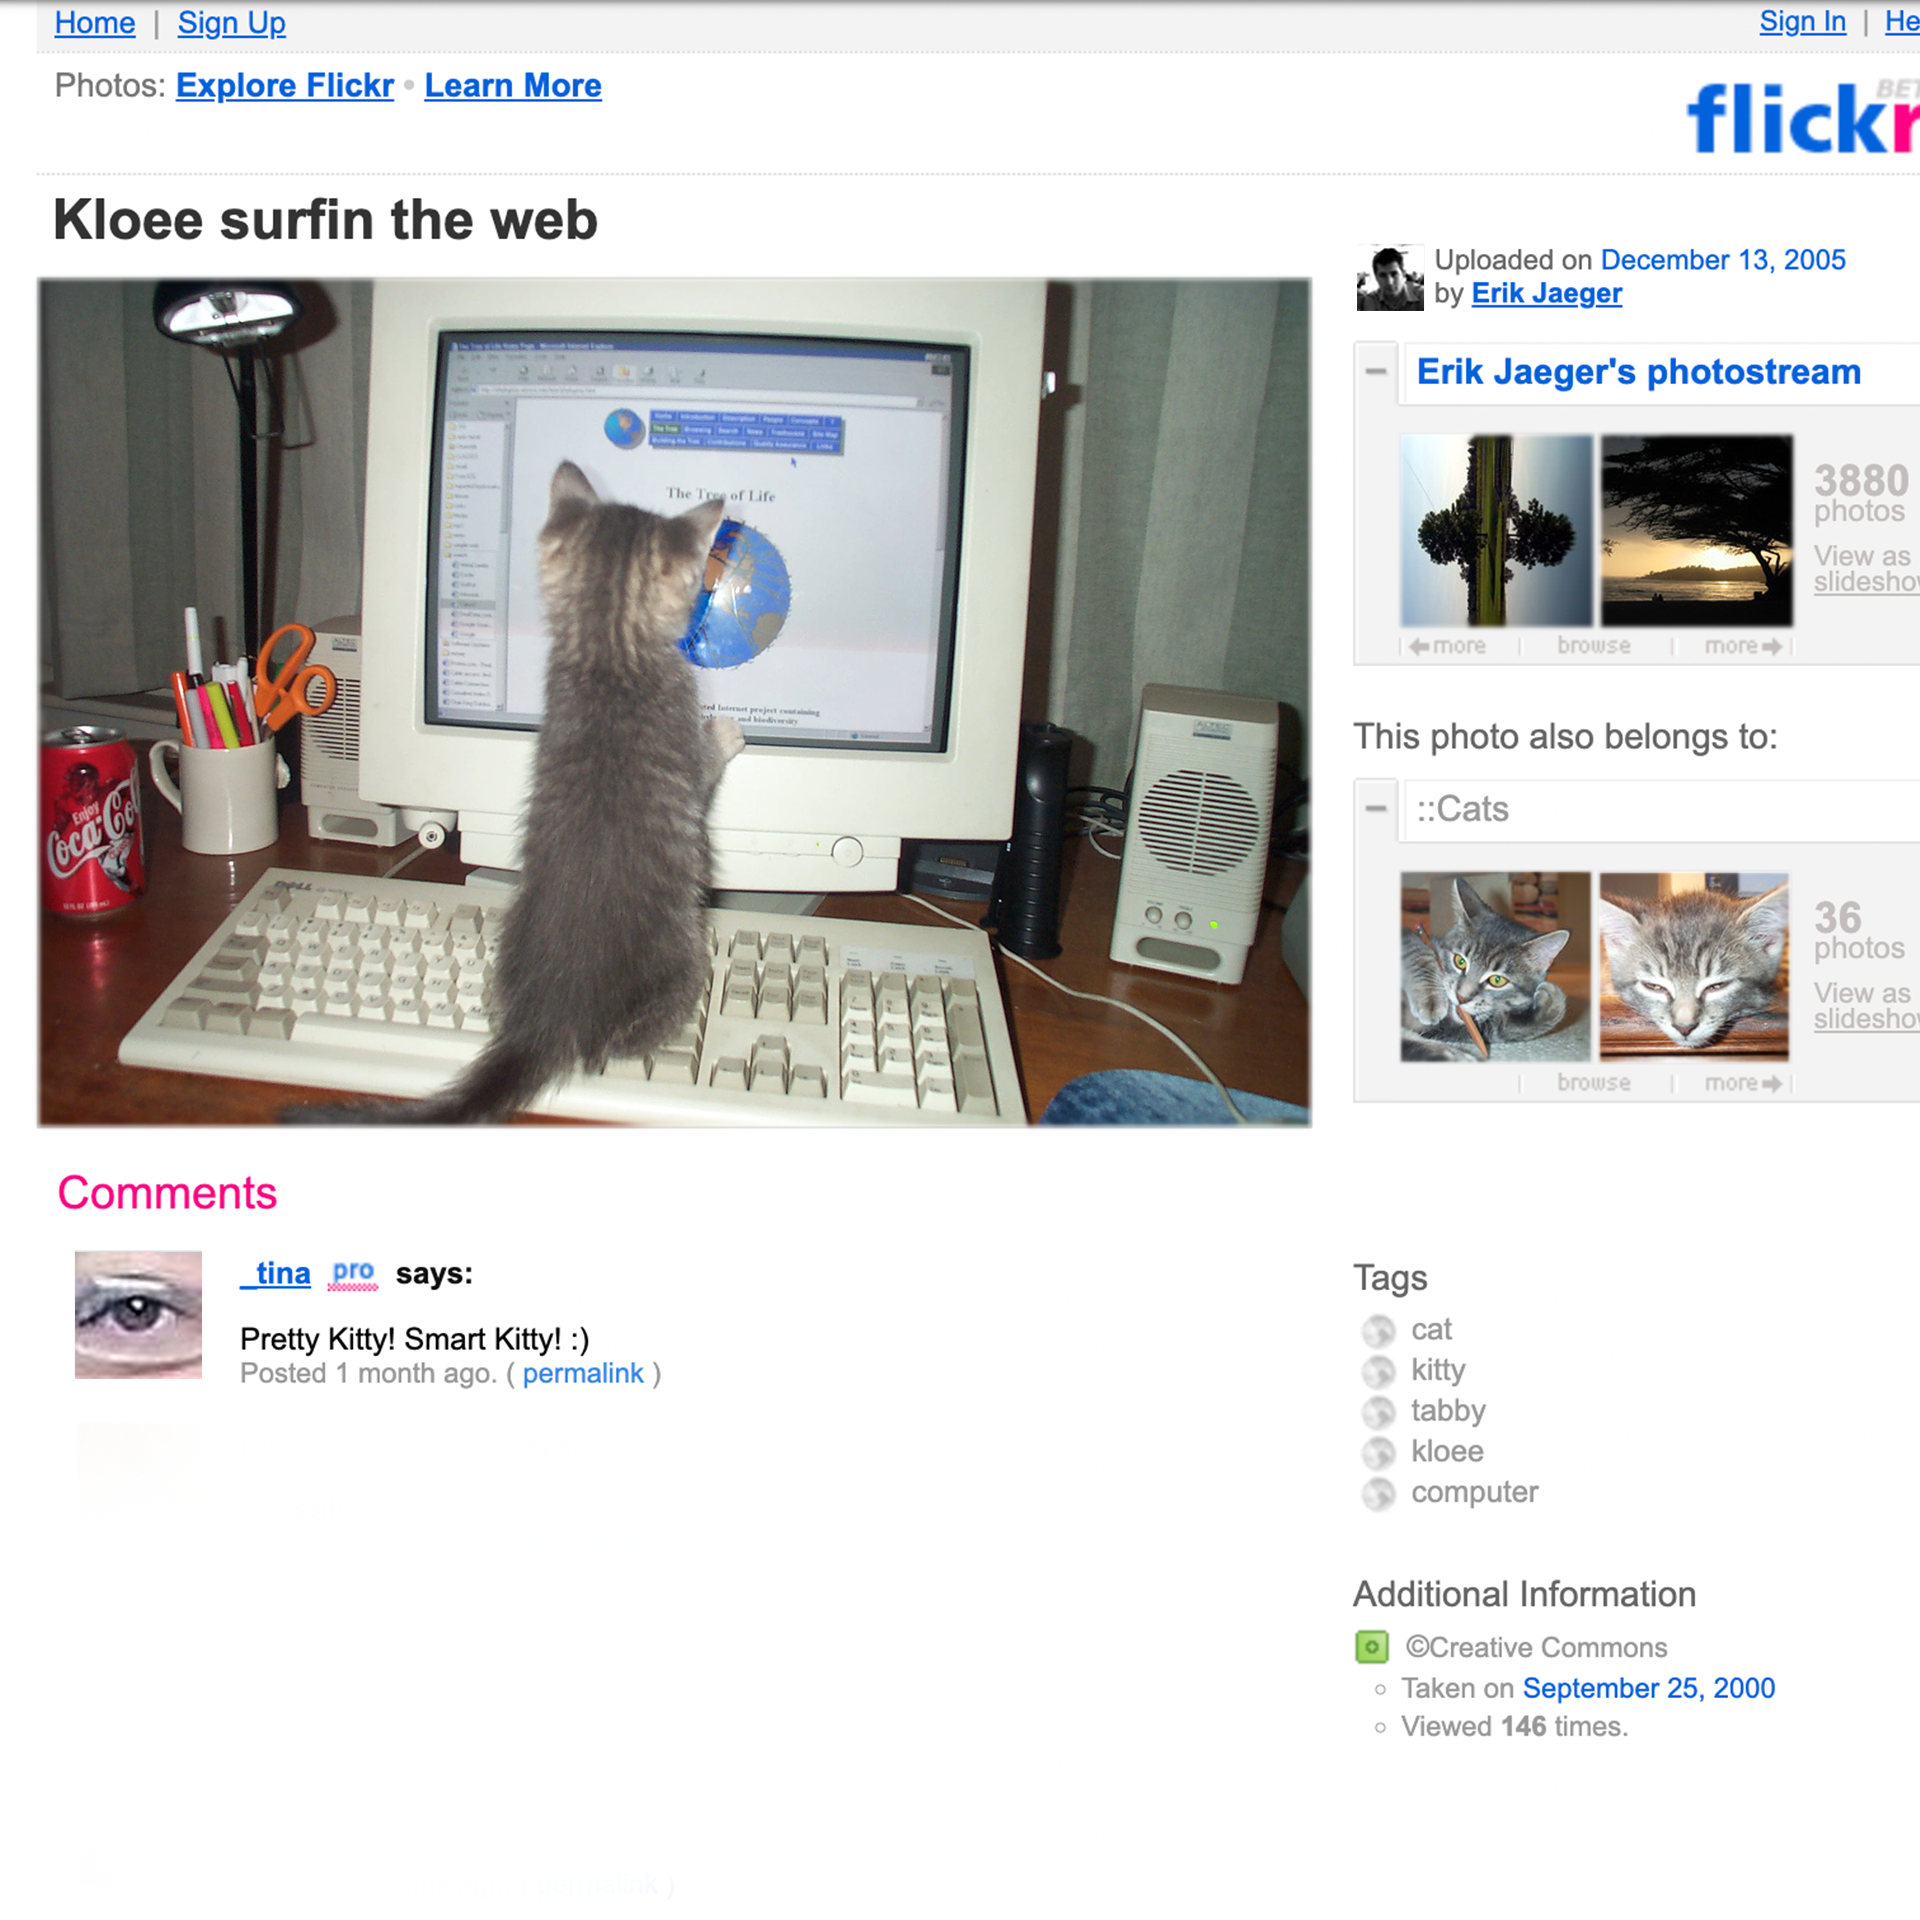 The webpage “flickr” shows a post of Kloee, a web-surfing kitten, with a comment “Pretty Kitty! Smart Kitty! :)”.